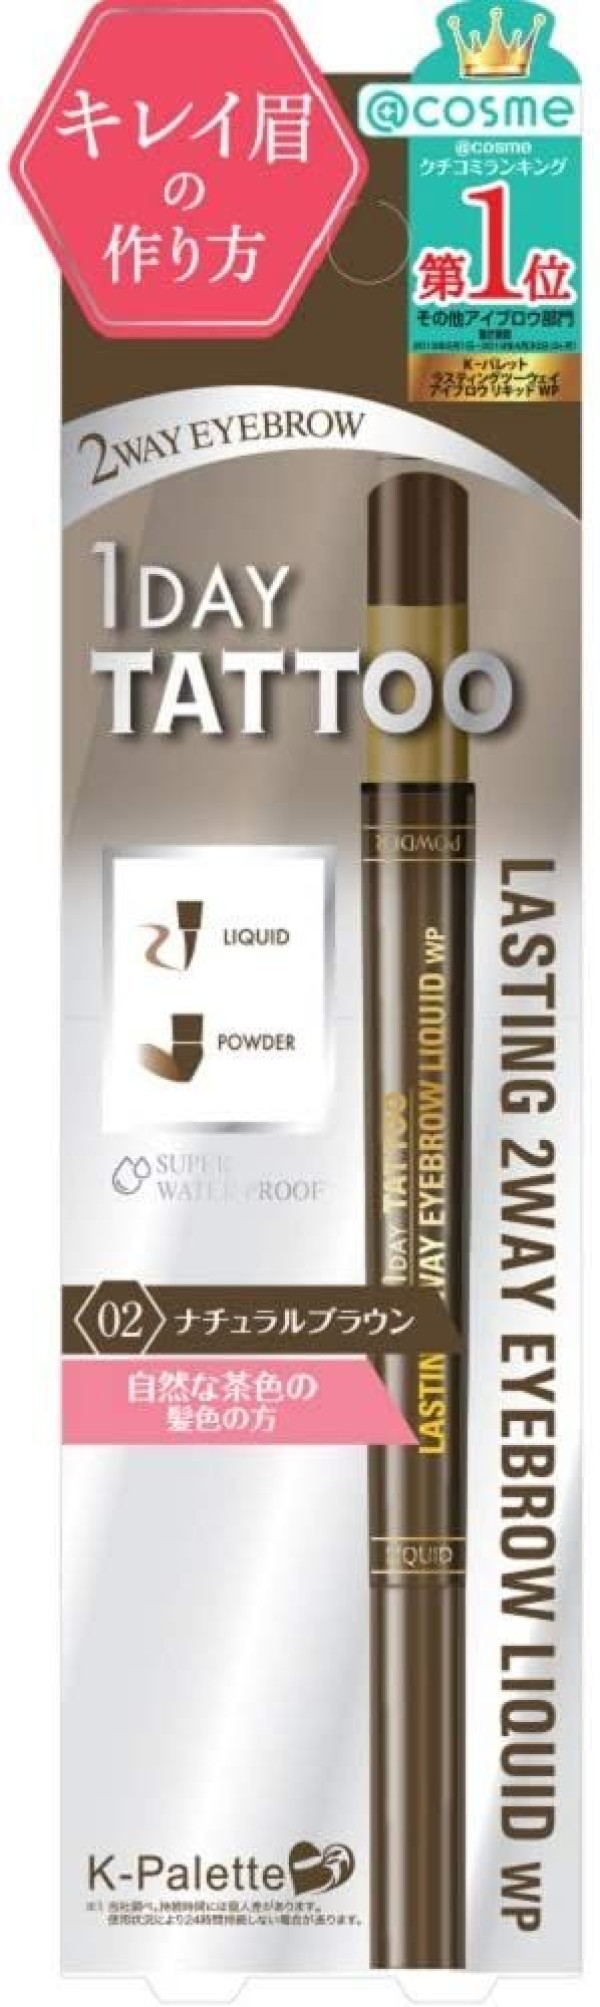 K-Palette 1 Day Tattoo Lasting Double Eyebrow Pencil